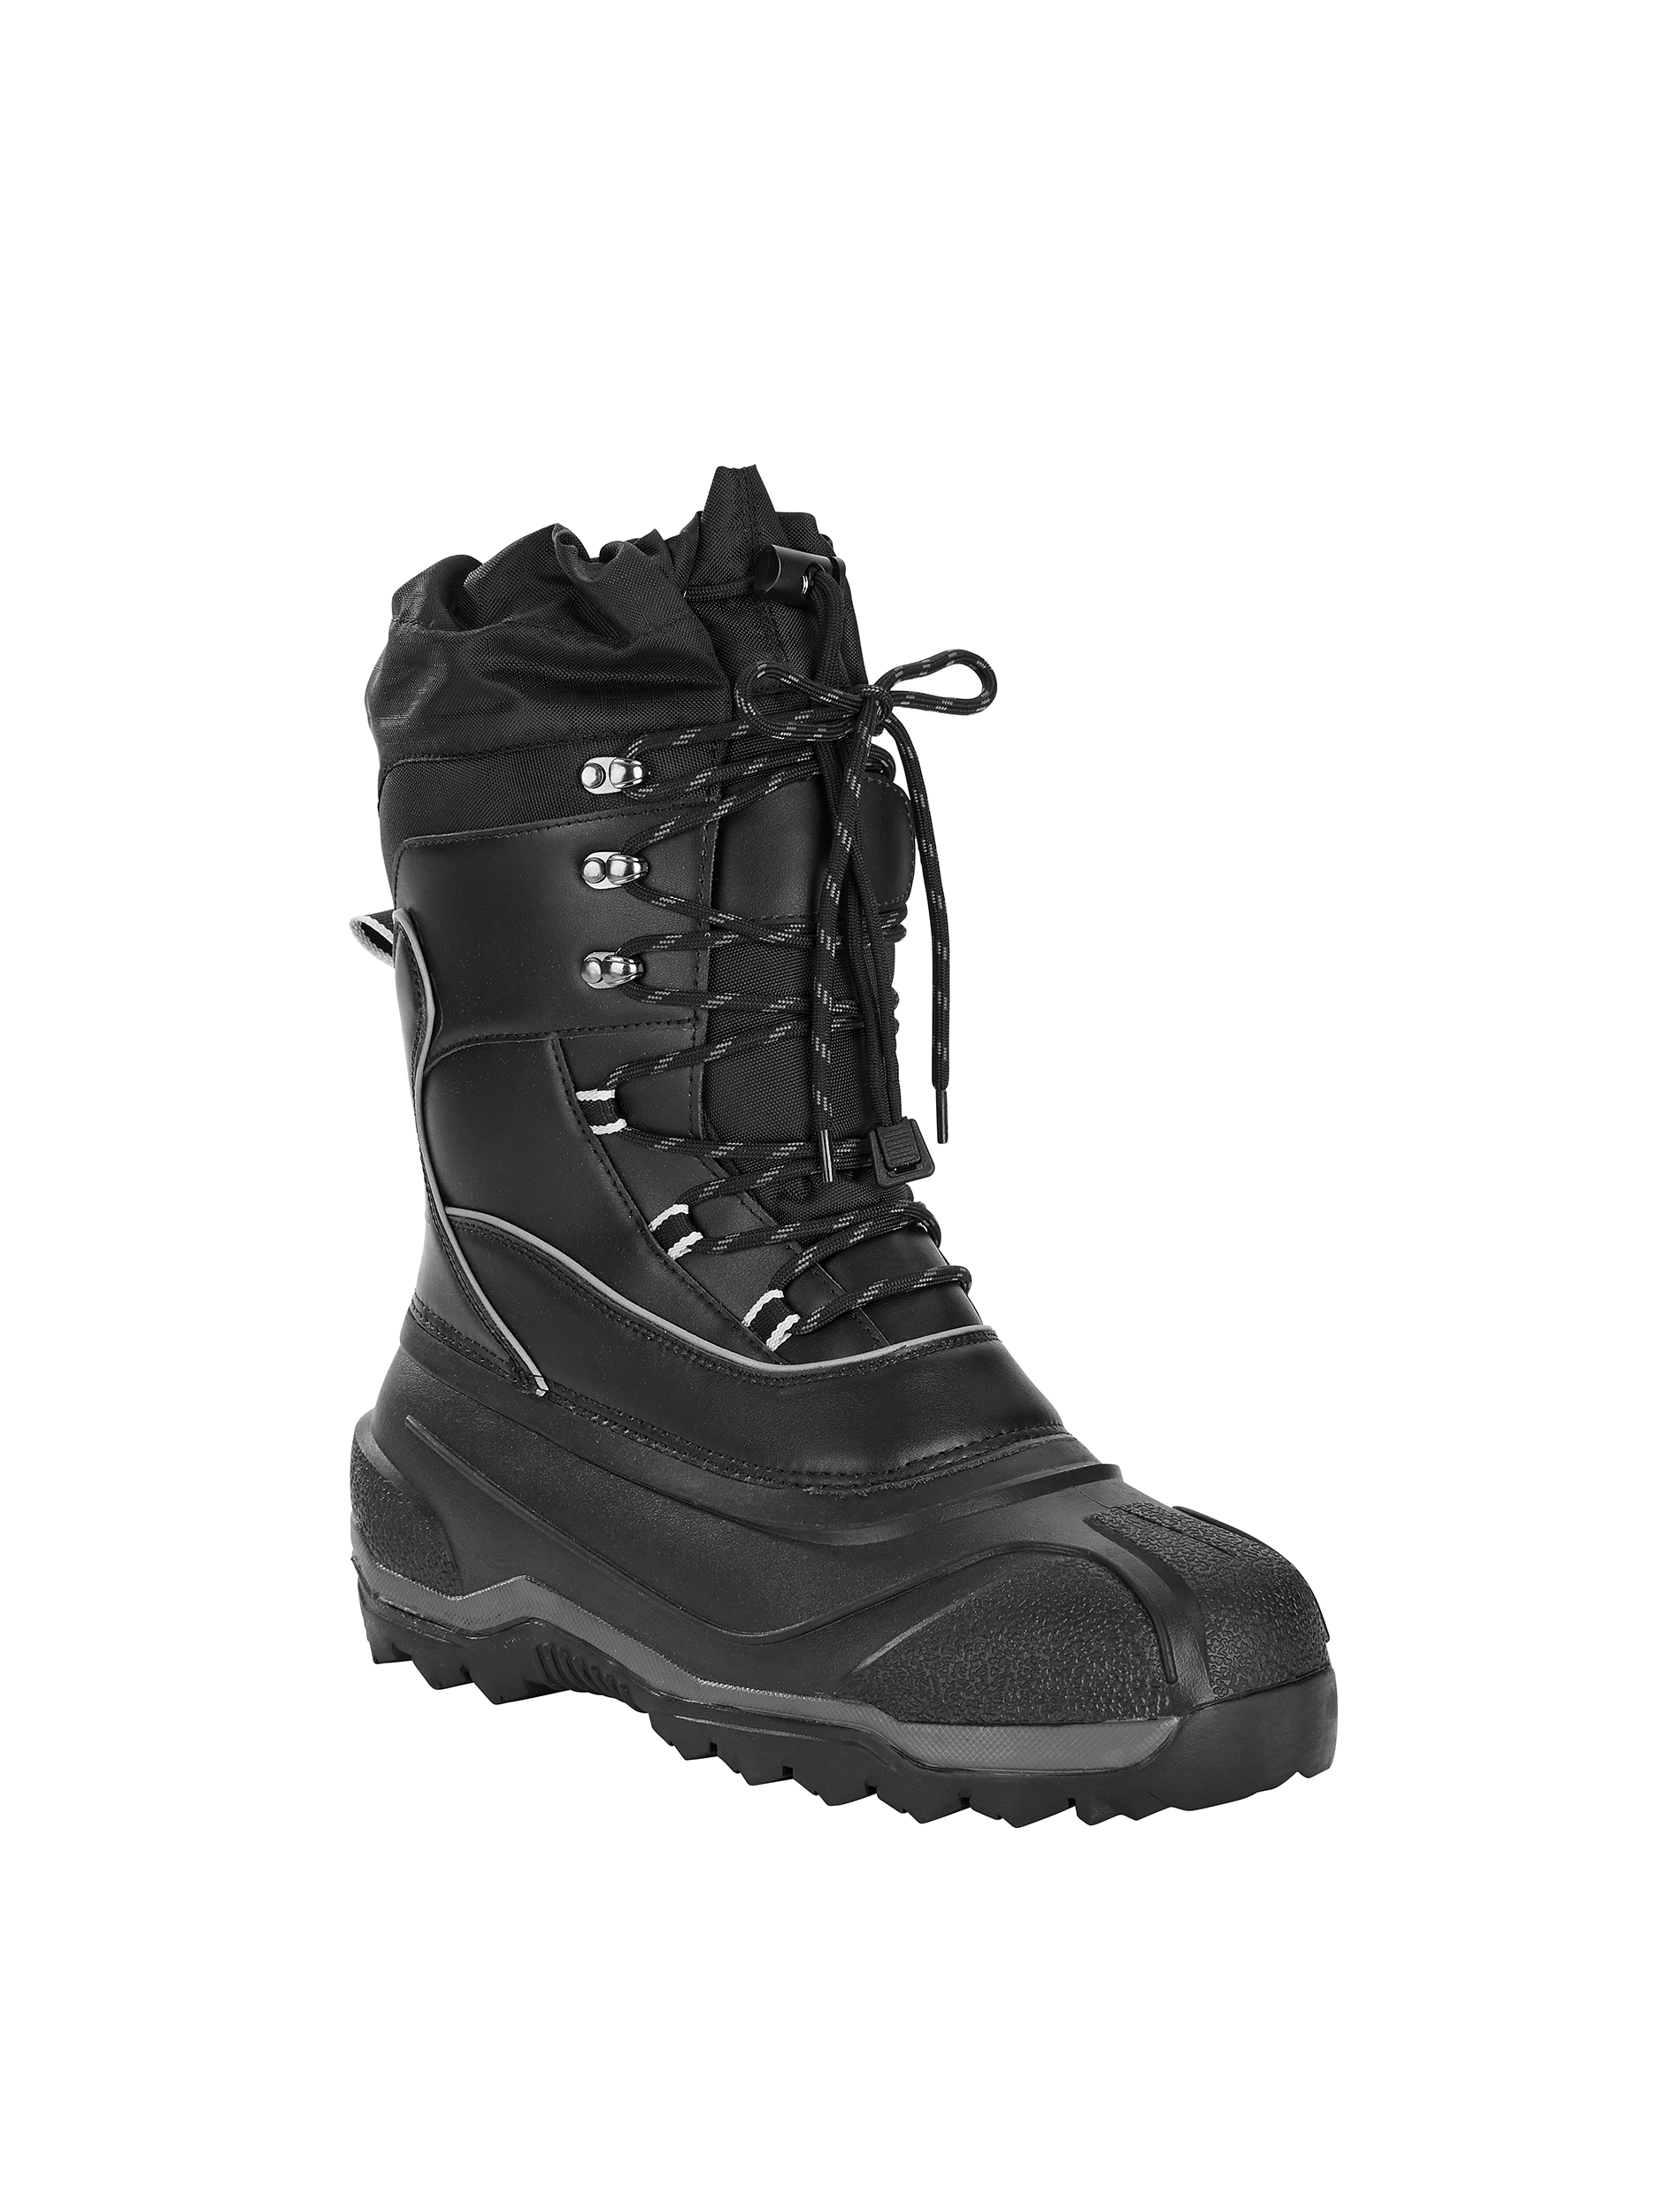 George Men's Insulated Extreme Winter Boot - image 1 of 5